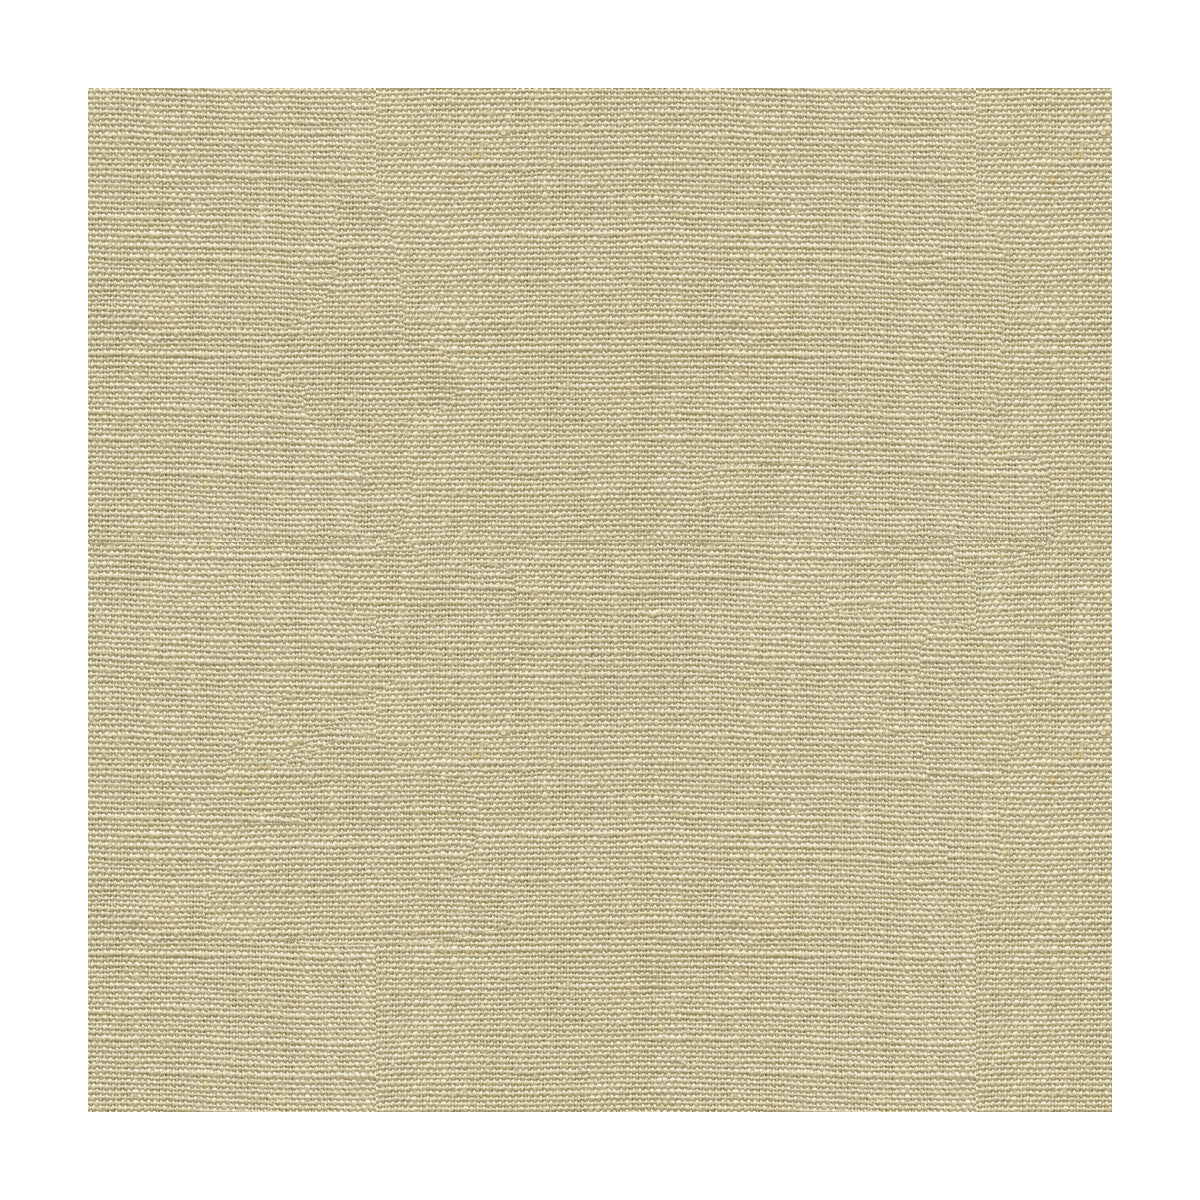 Kravet Basics fabric in 33771-1611 color - pattern 33771.1611.0 - by Kravet Basics in the Perfect Plains collection